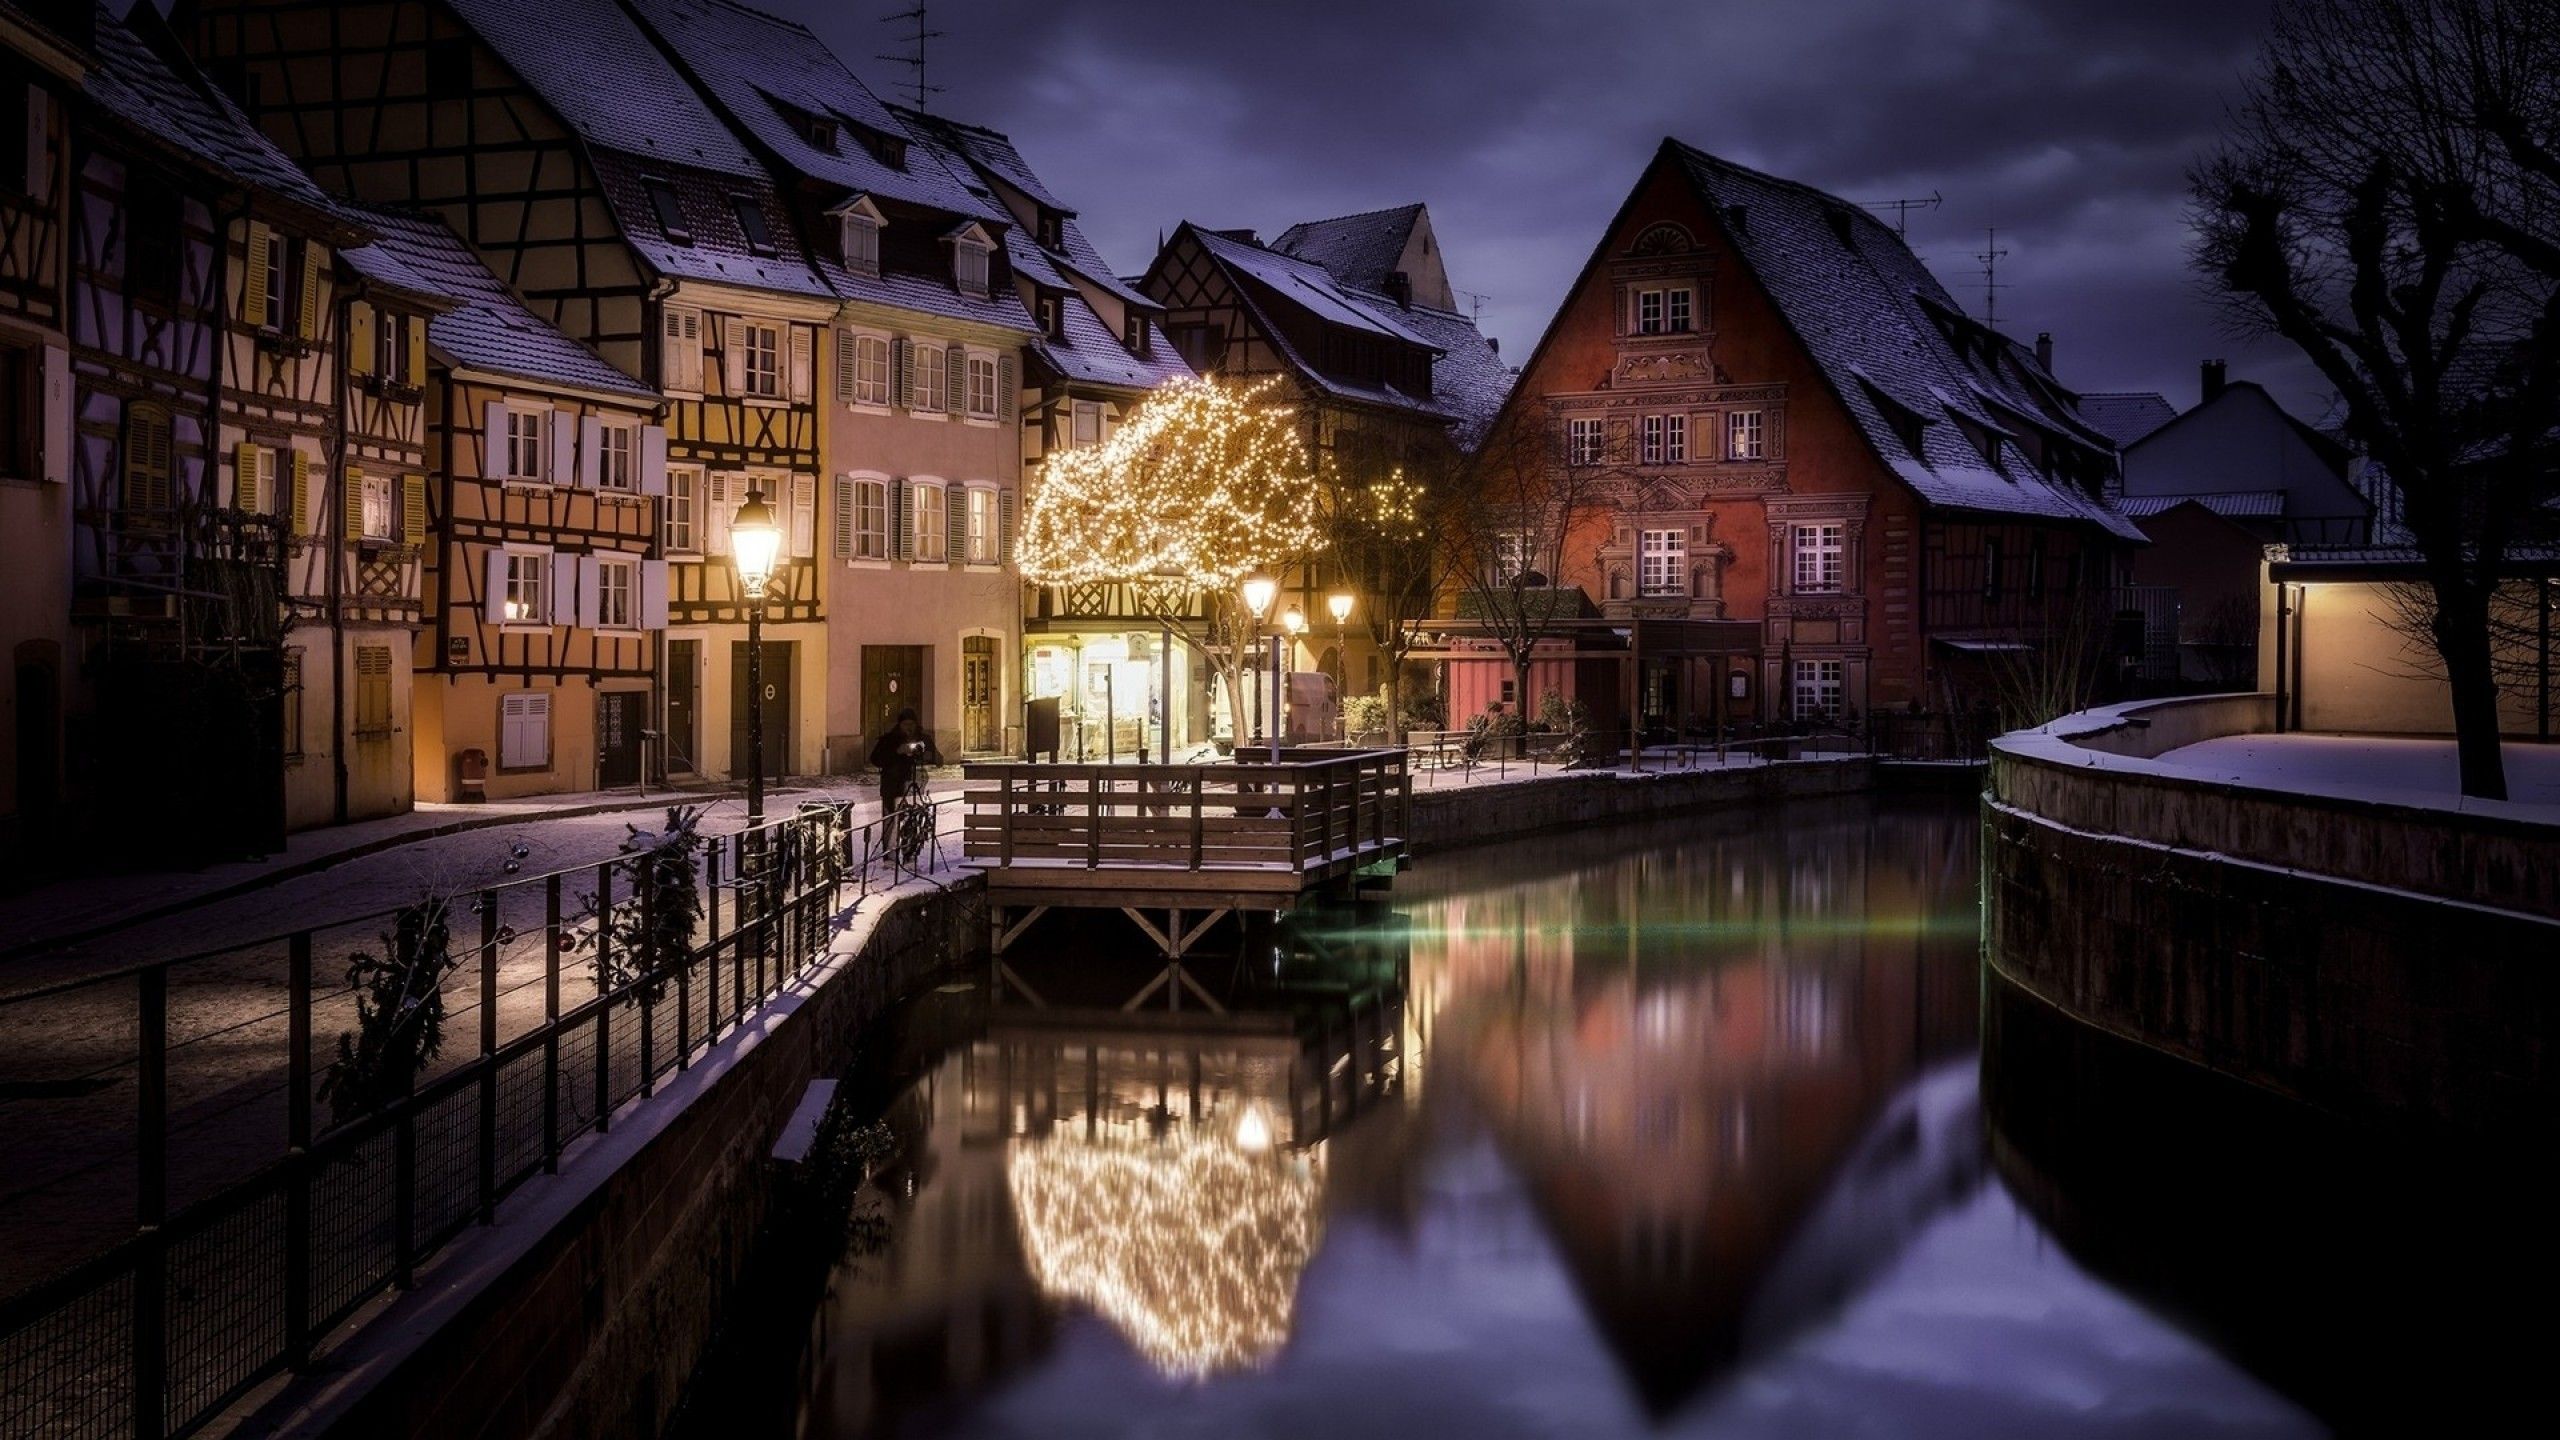 Download 2560x1440 France, Canal, Buildings, Lights, Christmas, Water, Winter, Night, Tree, Ornaments Wallpaper for iMac 27 inch